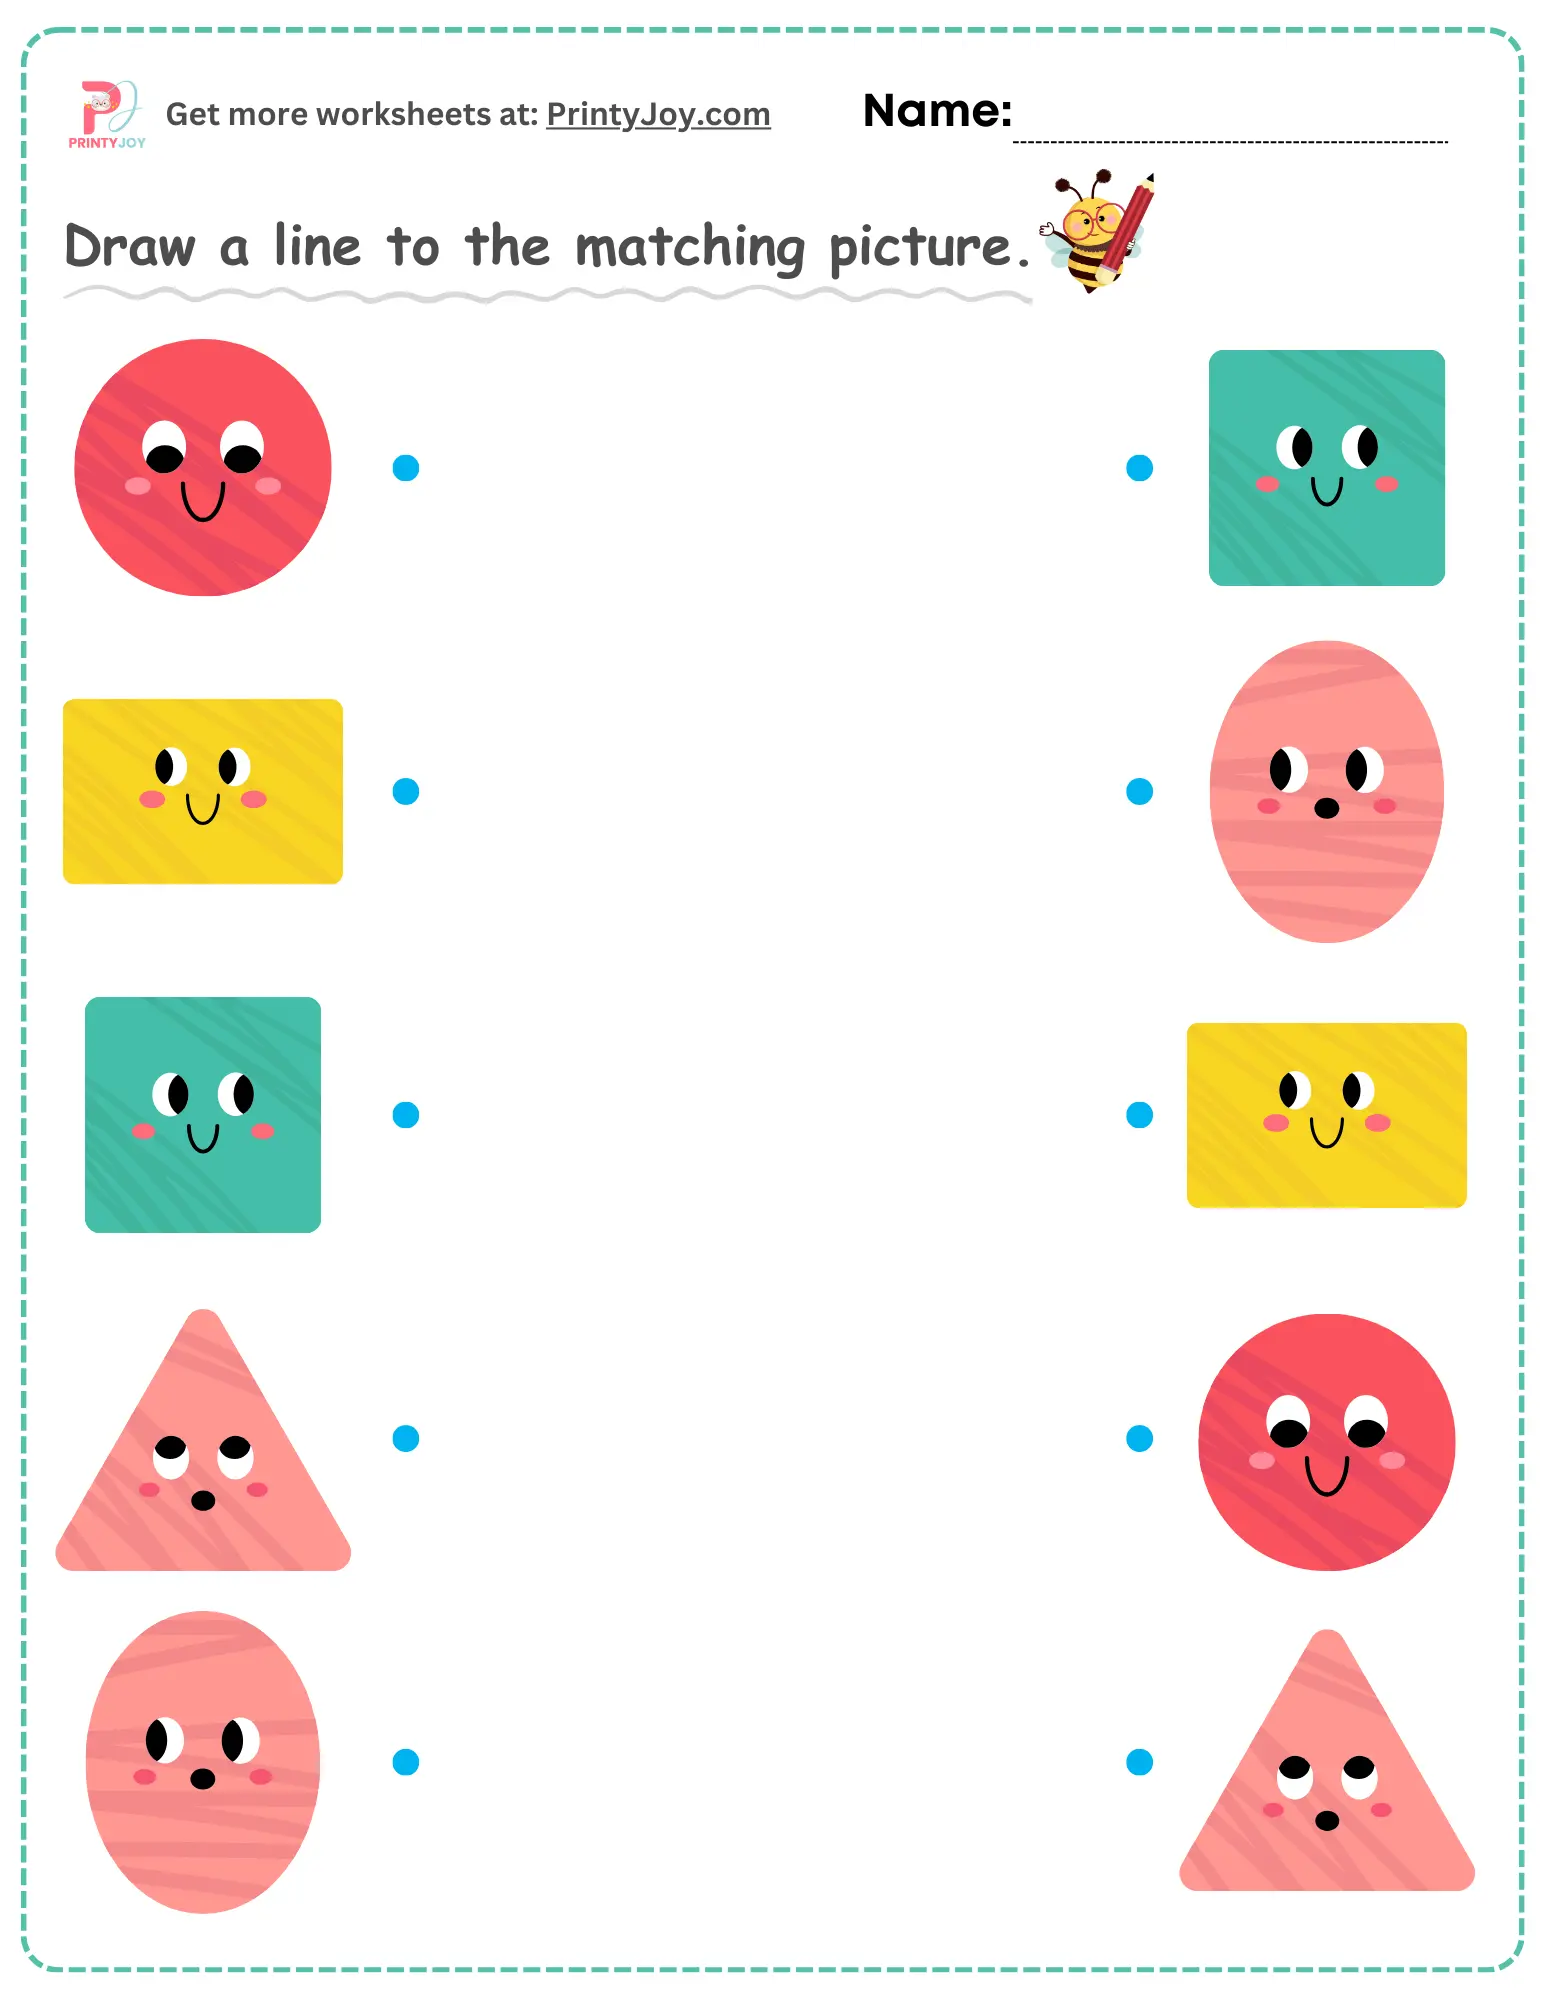 shapes matching worksheets for kids free download